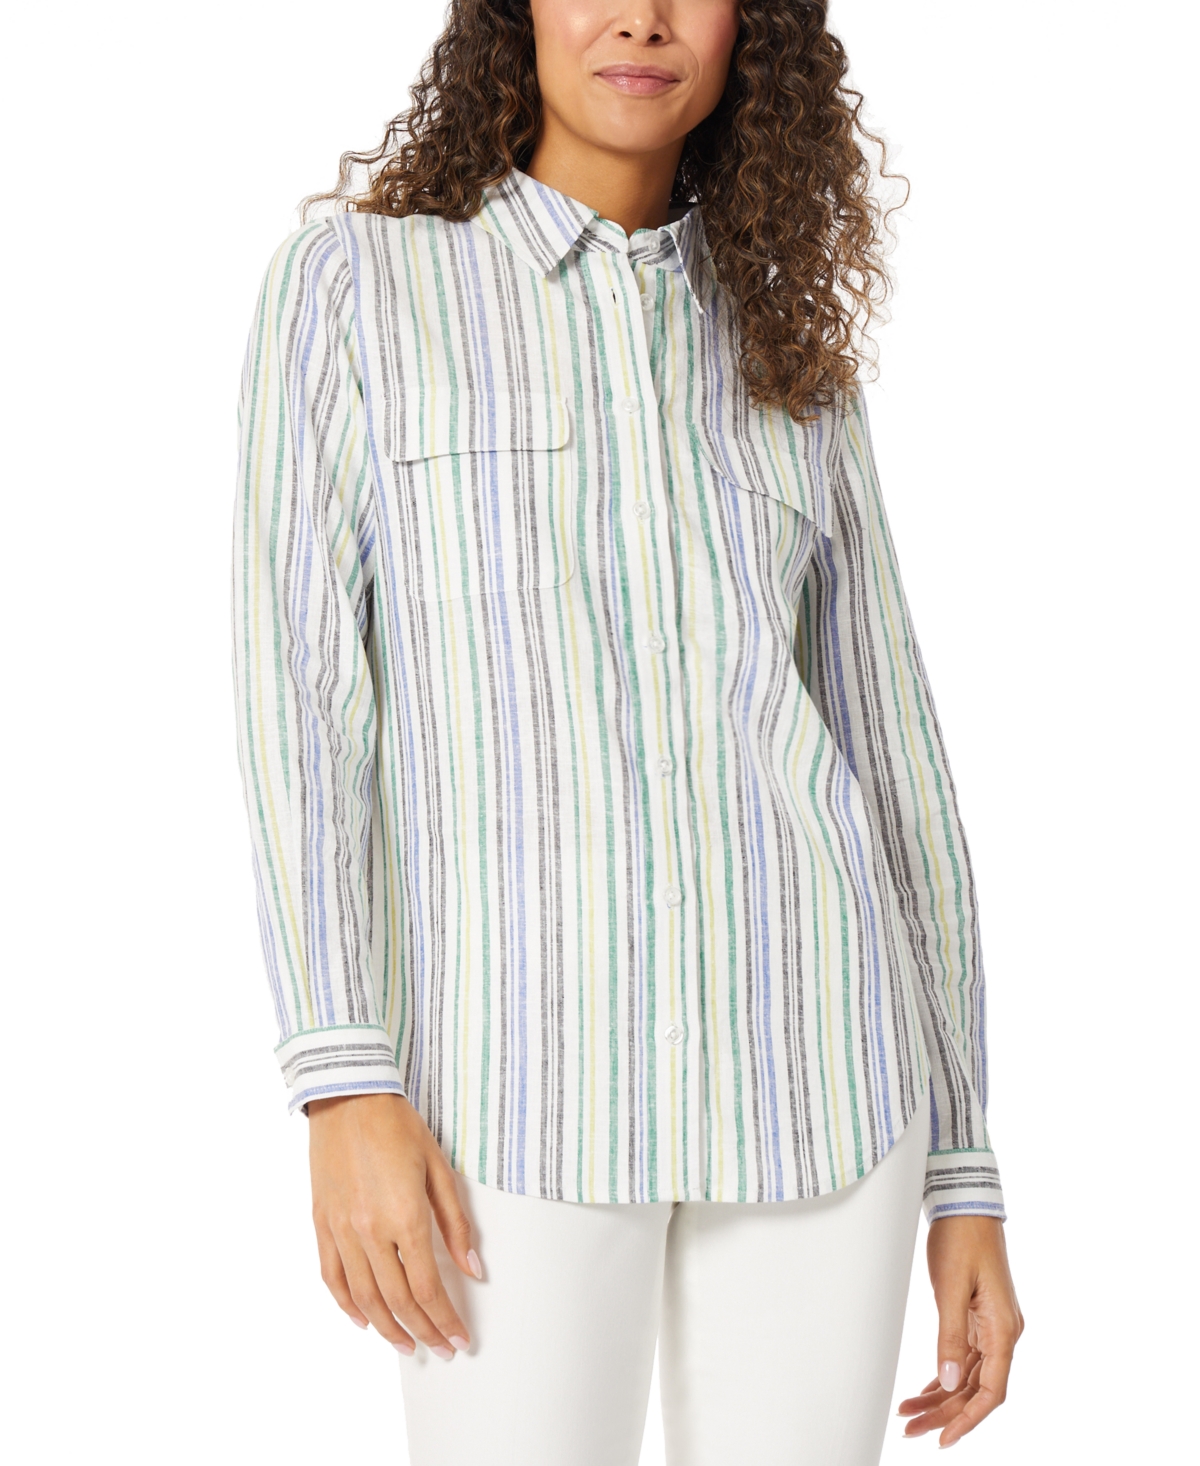 Women's Striped Button-Up Tunic Linen Top - NYC White/Kelly Multi